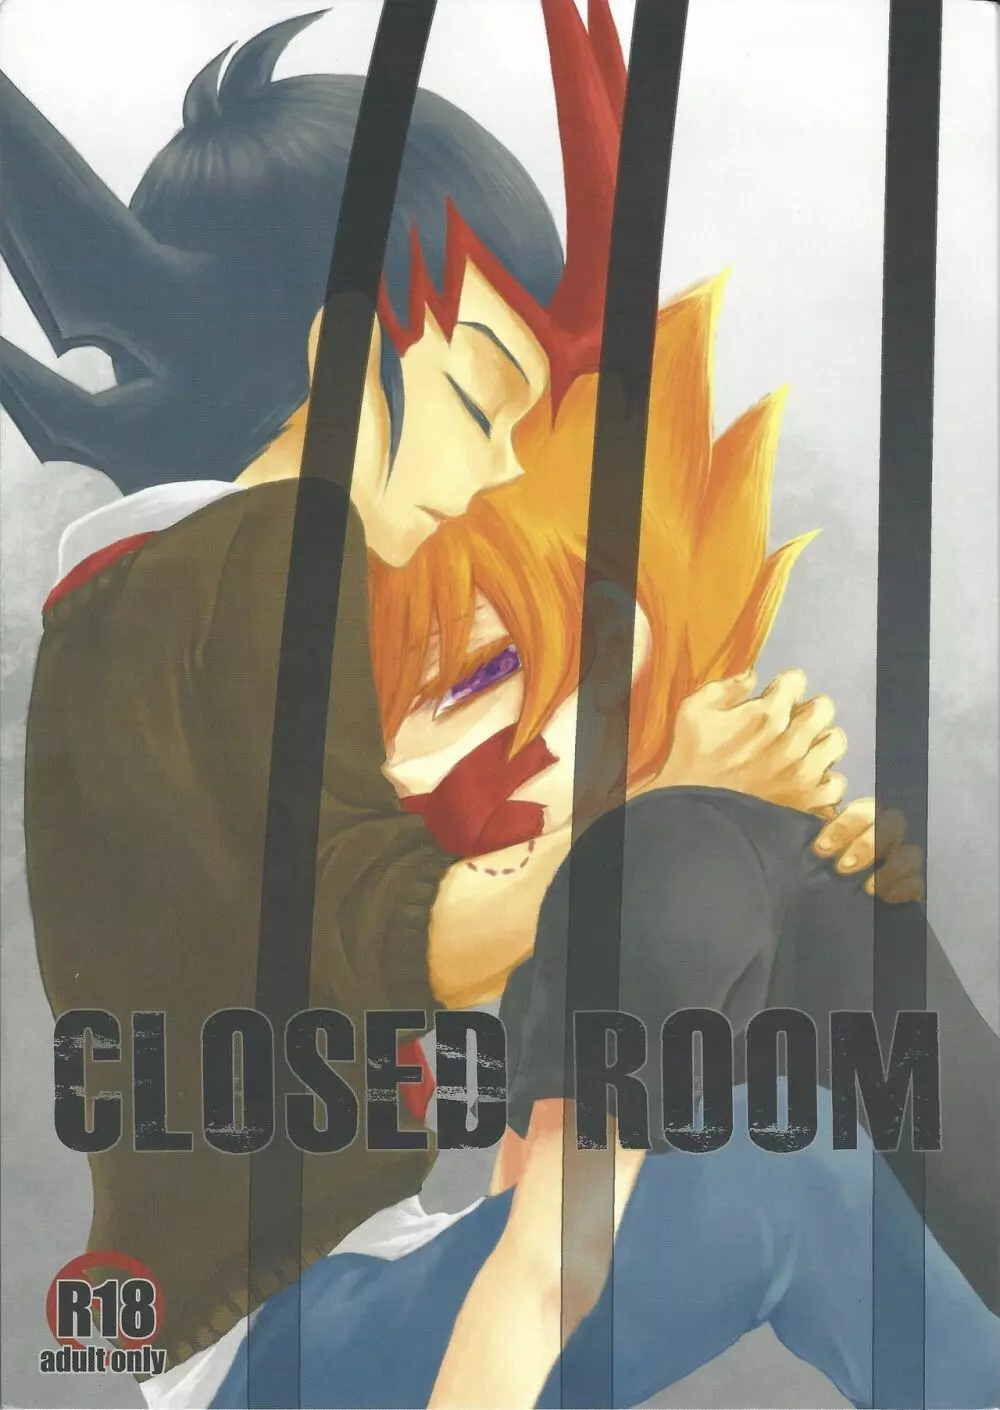 CLOSED ROOM Page.1